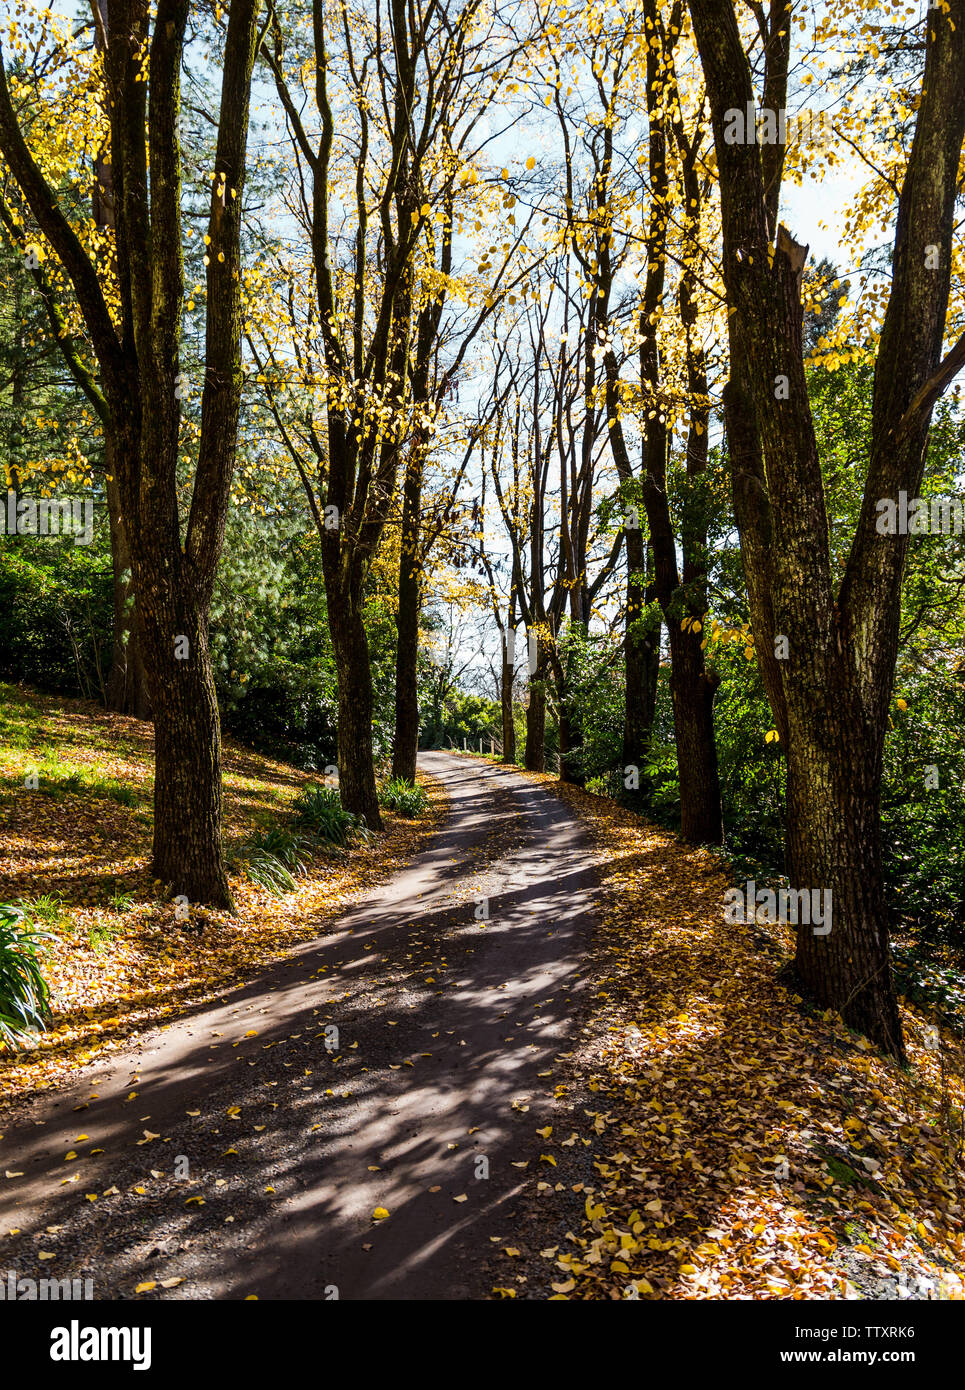 Path through a large garden lined with Autumn (fall) trees, with shadows on the path, and yellow leaves on the trees and ground Stock Photo